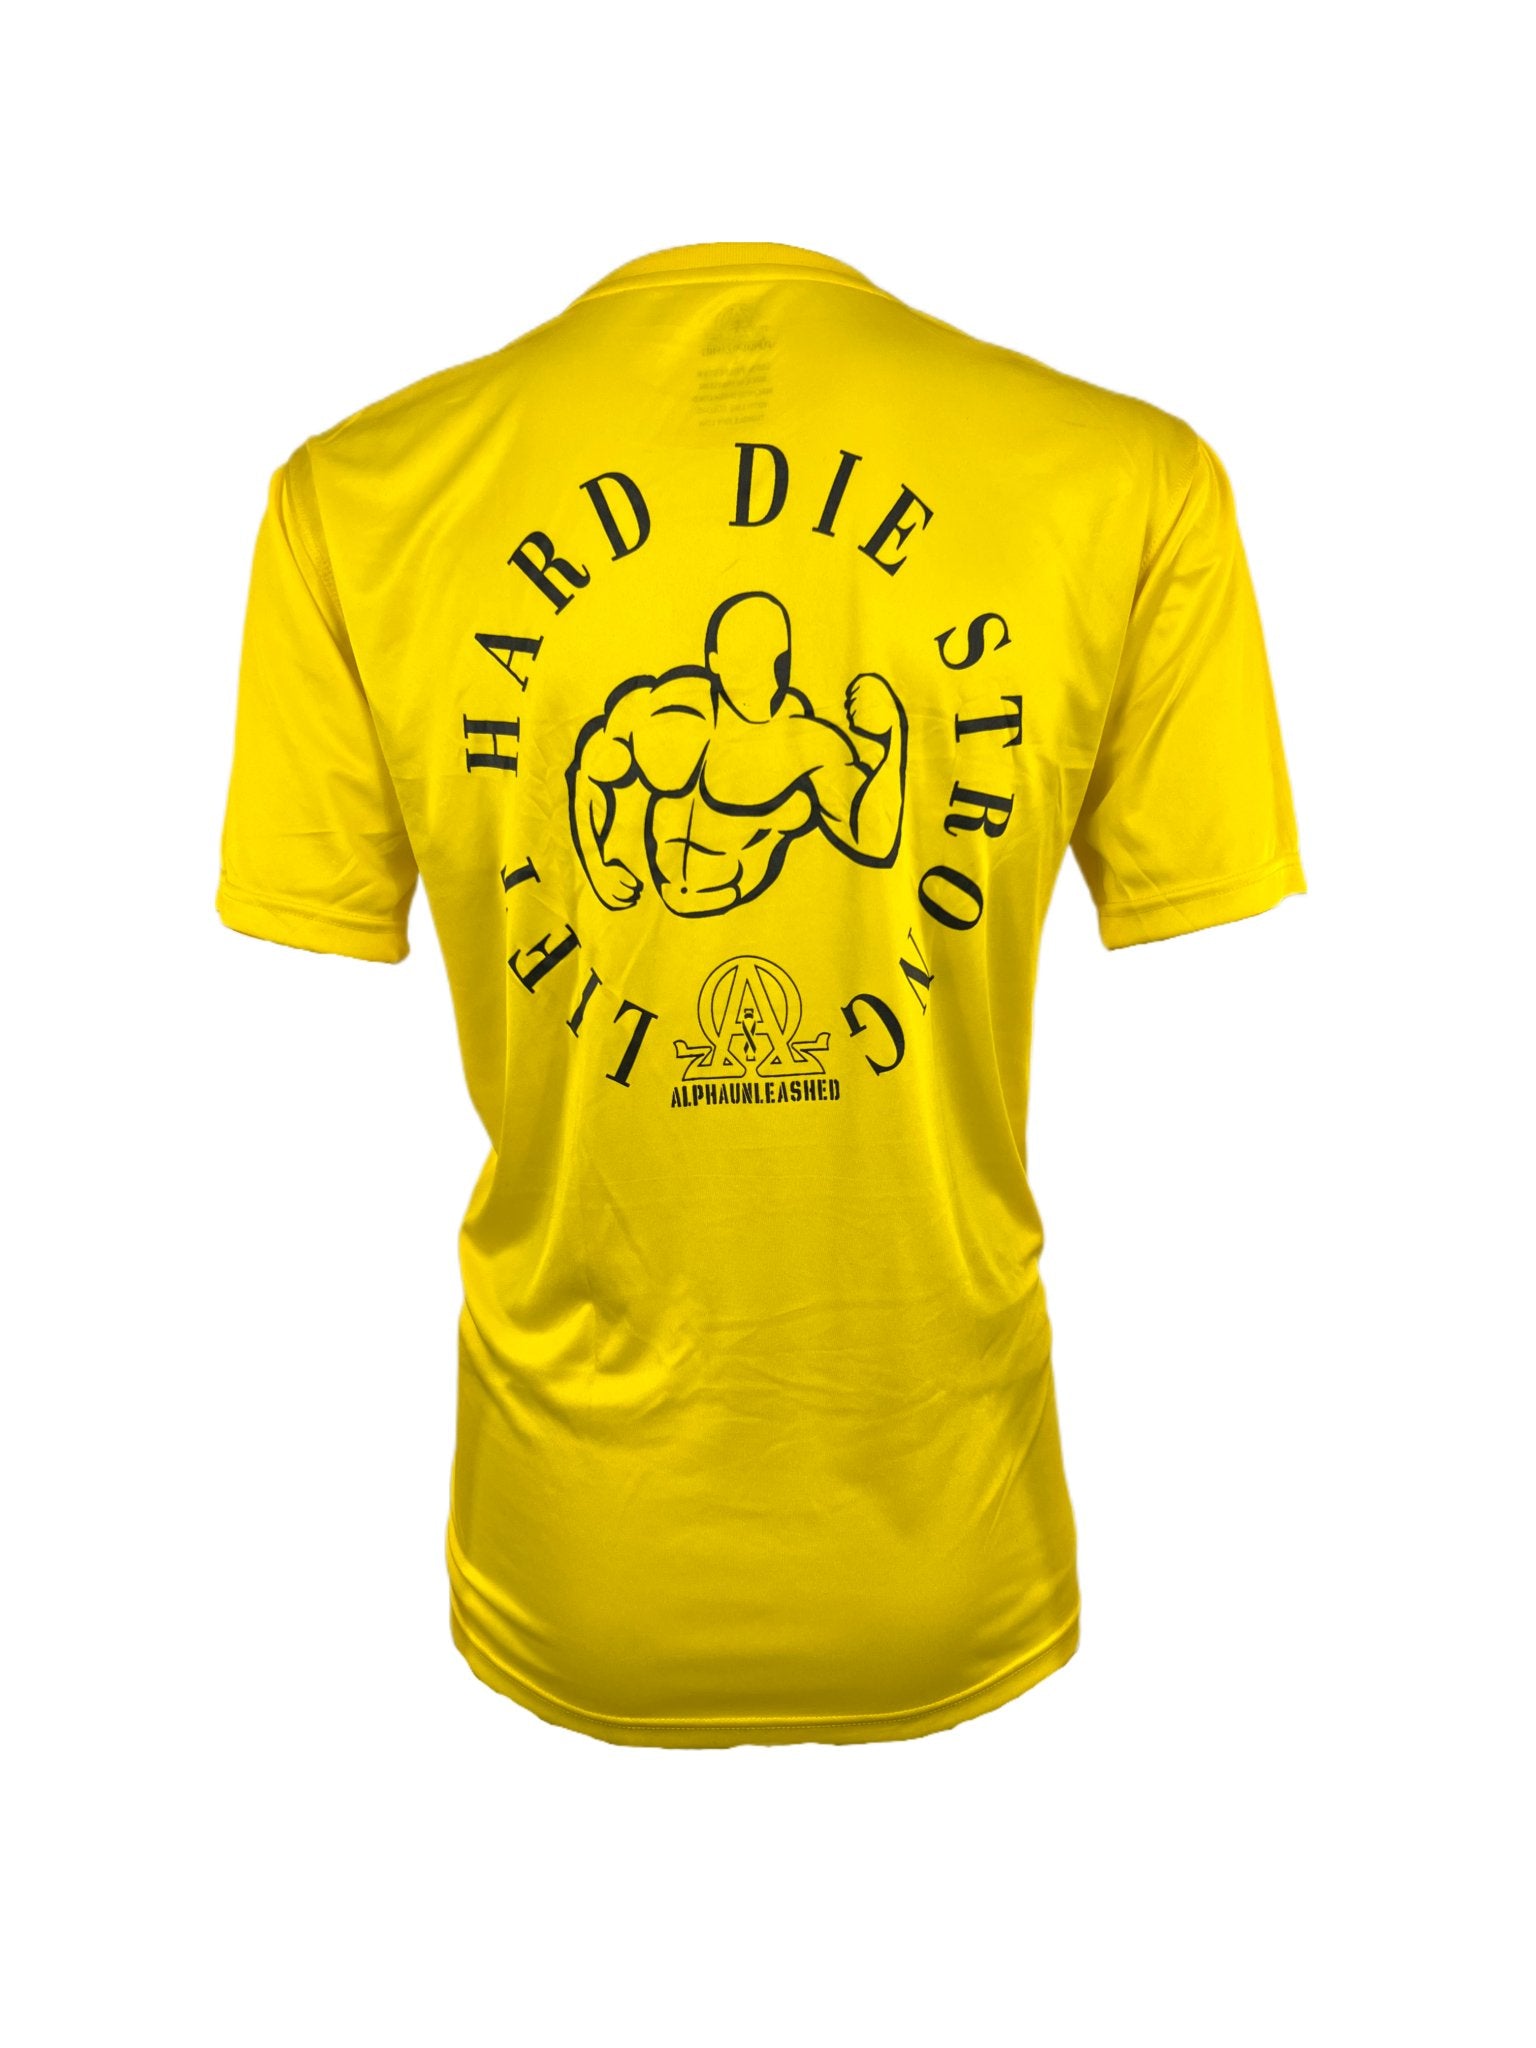 MENS MOISTURE WICKING GYM SHIRT | LIFT HARD DIE STRONG TSHIRT - YELLOW | ALPHAUNLEASHED - ALPHAunleashed